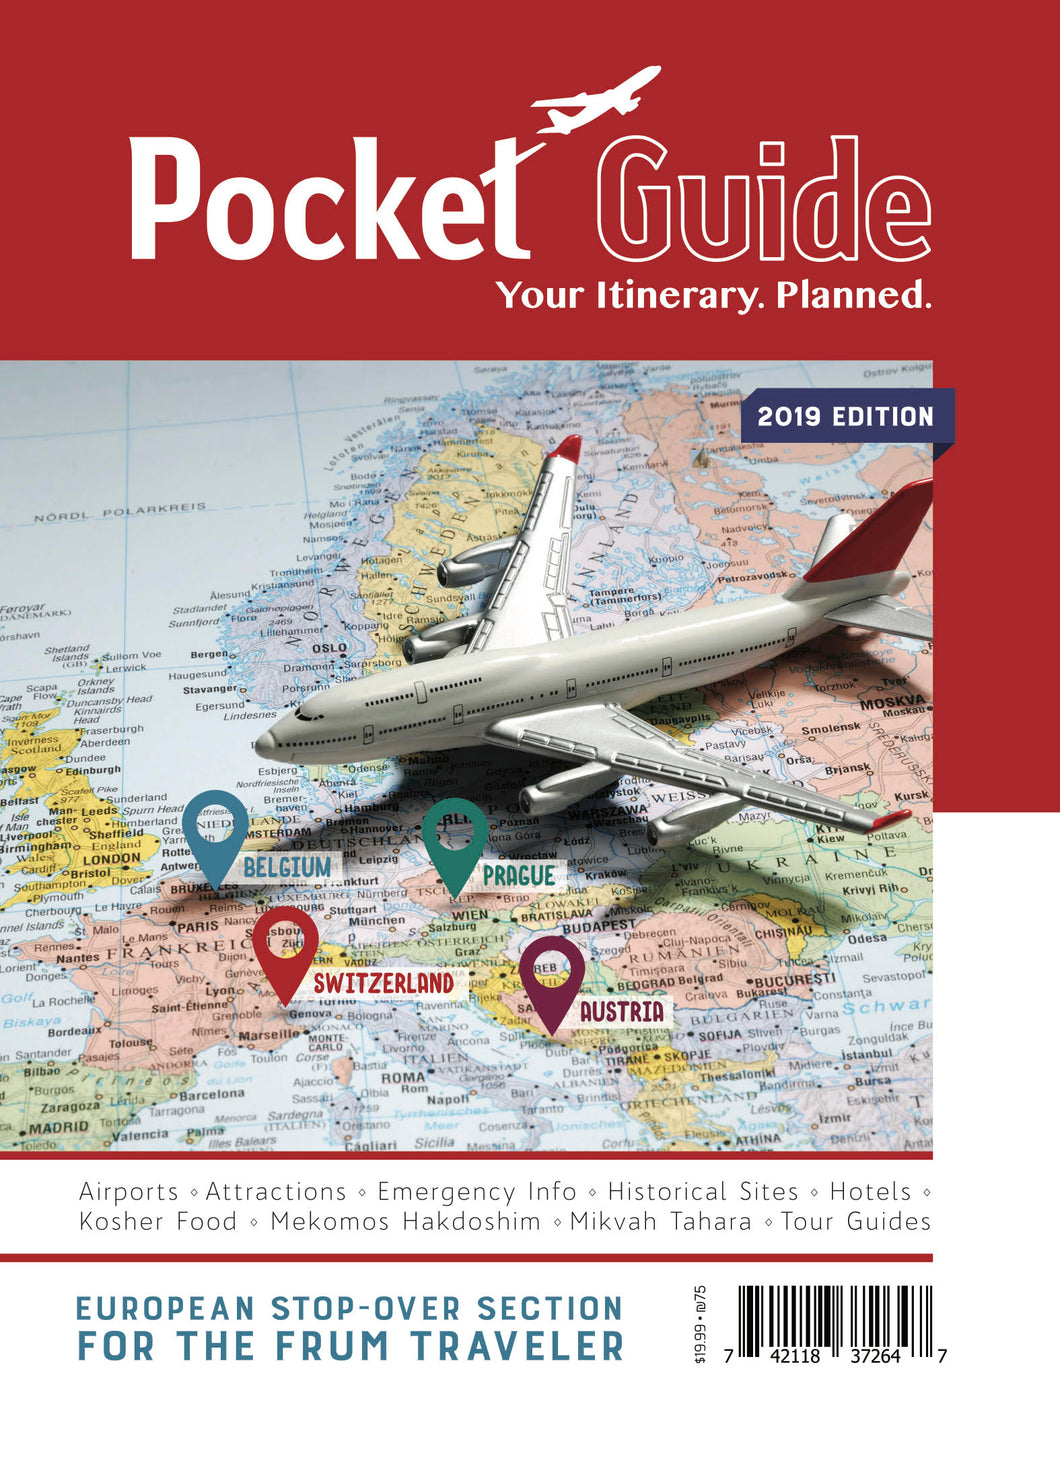 Pocket Guide - Jewish Travel Guide Pocket Guide- Europe Stop Over Section 2019